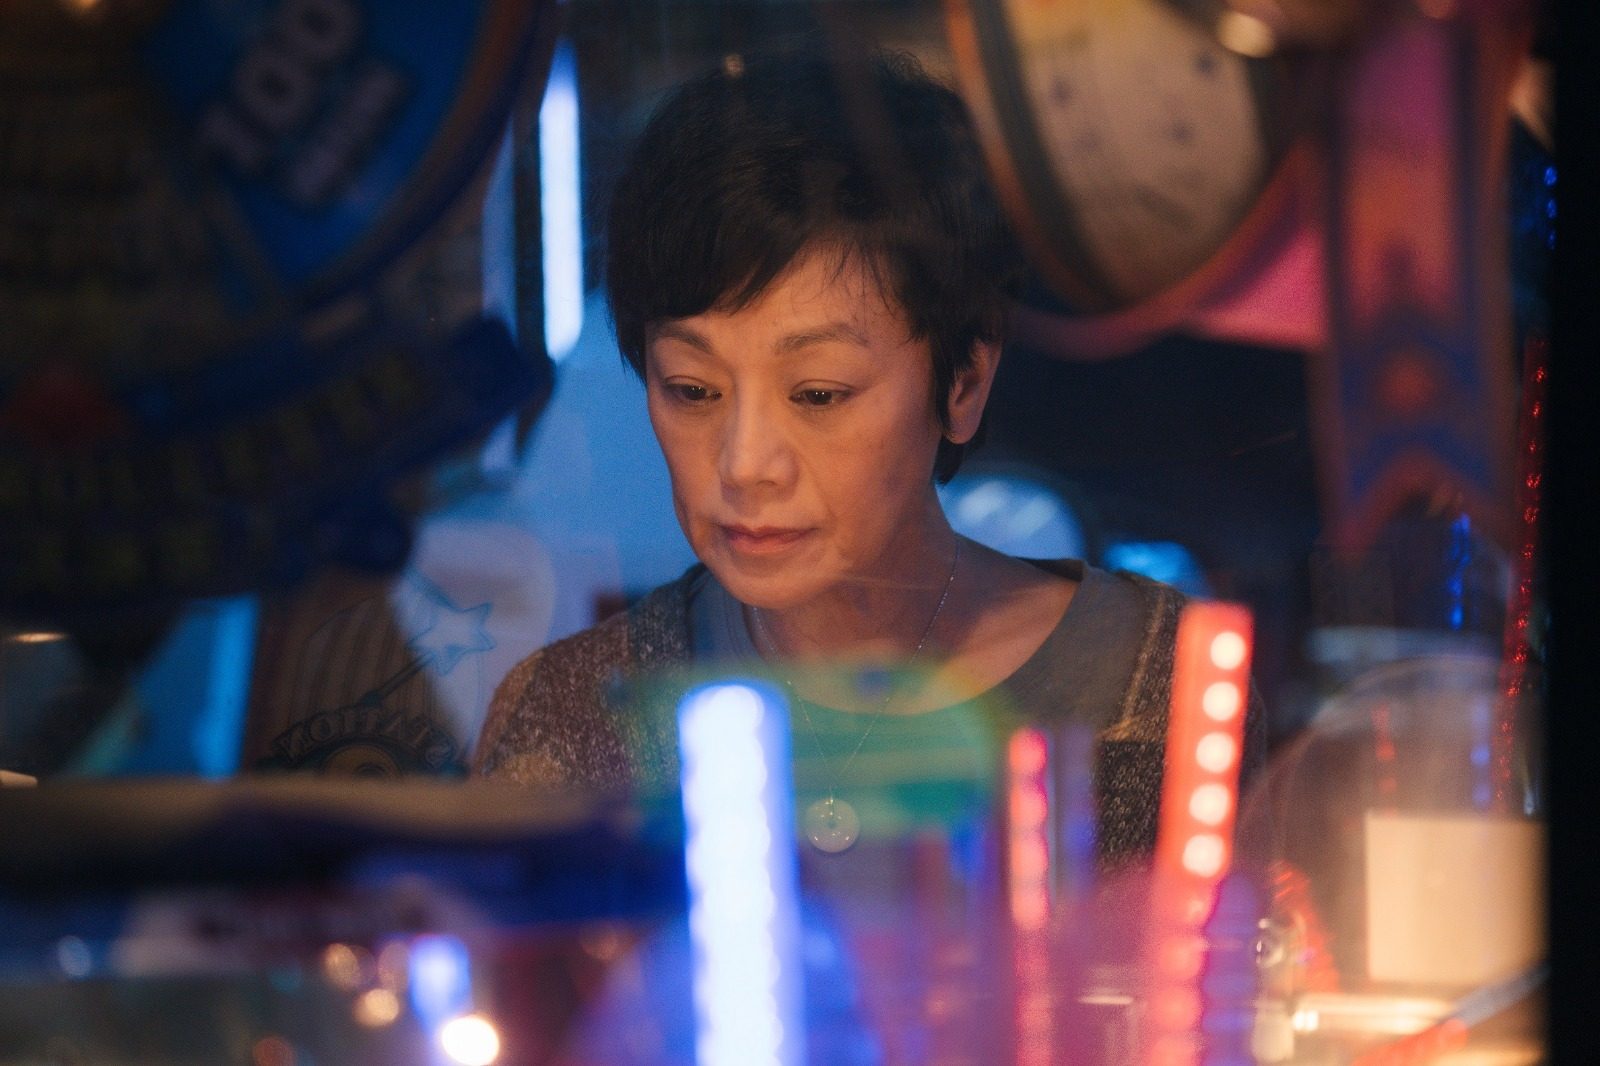 Sylvia Chang in a still from “A Light Never Goes Out”, Hong Kong’s contender for the best international feature award at the 2024 Oscars. Photo: Edko Films